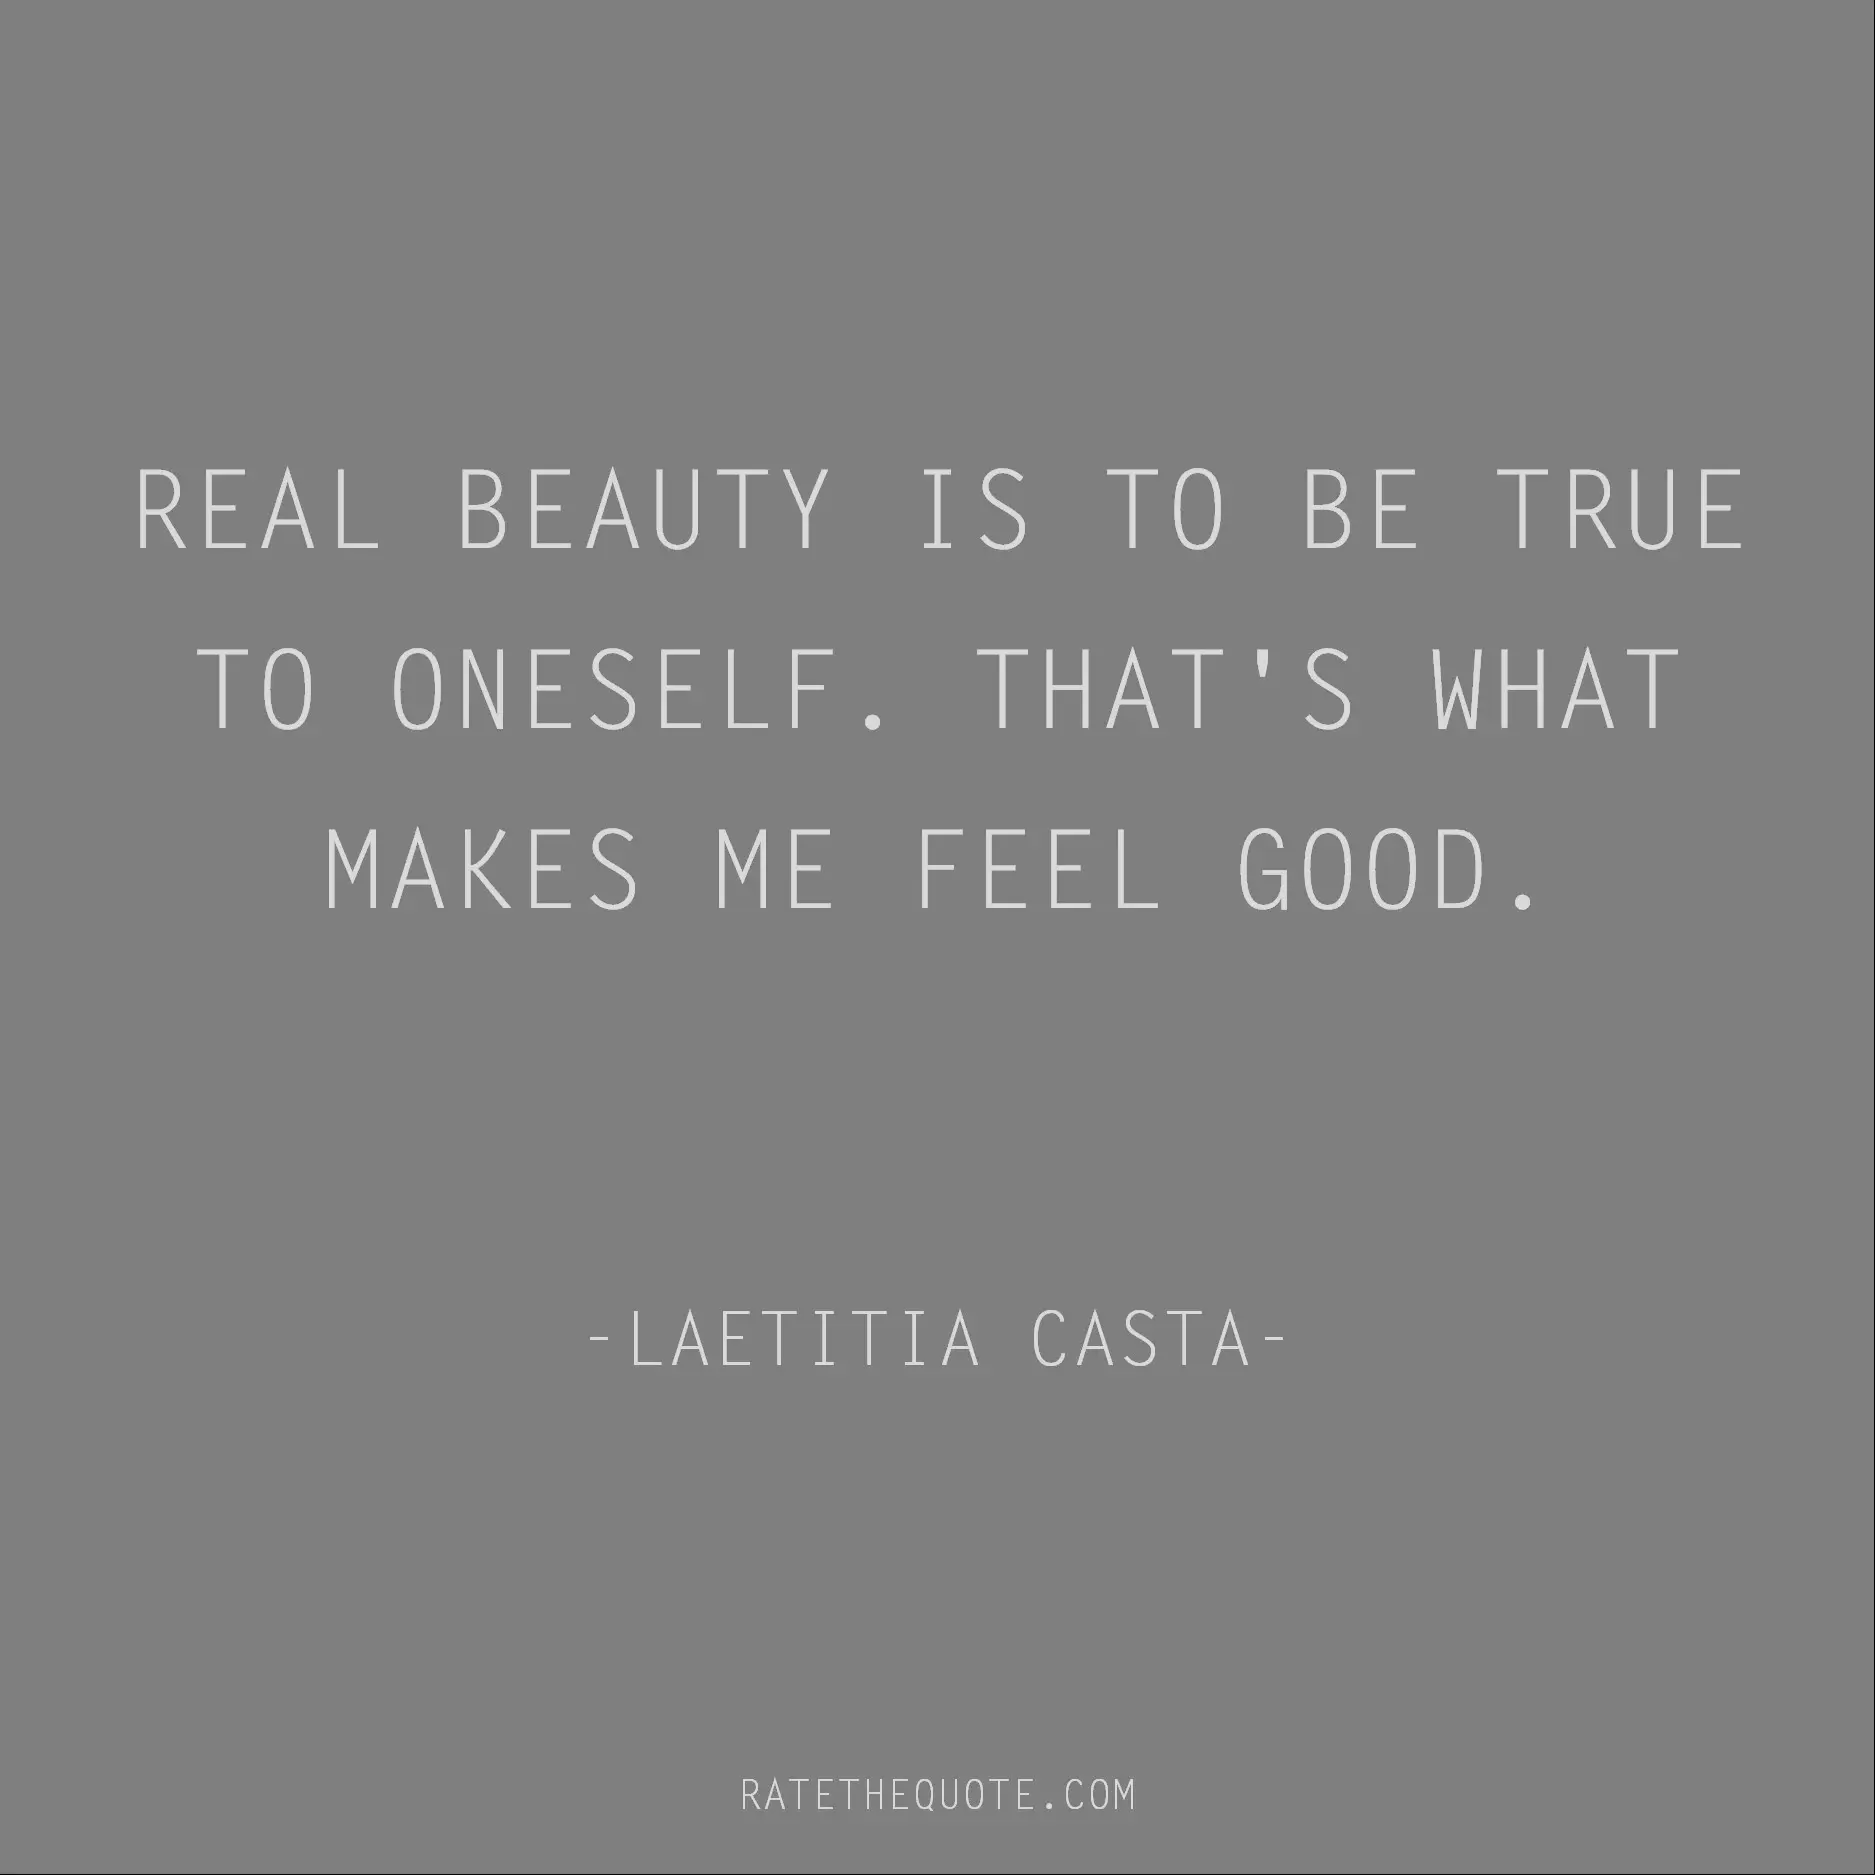 Quotes About Beauty Real beauty is to be true to oneself. That's what makes me feel good. Laetitia Casta